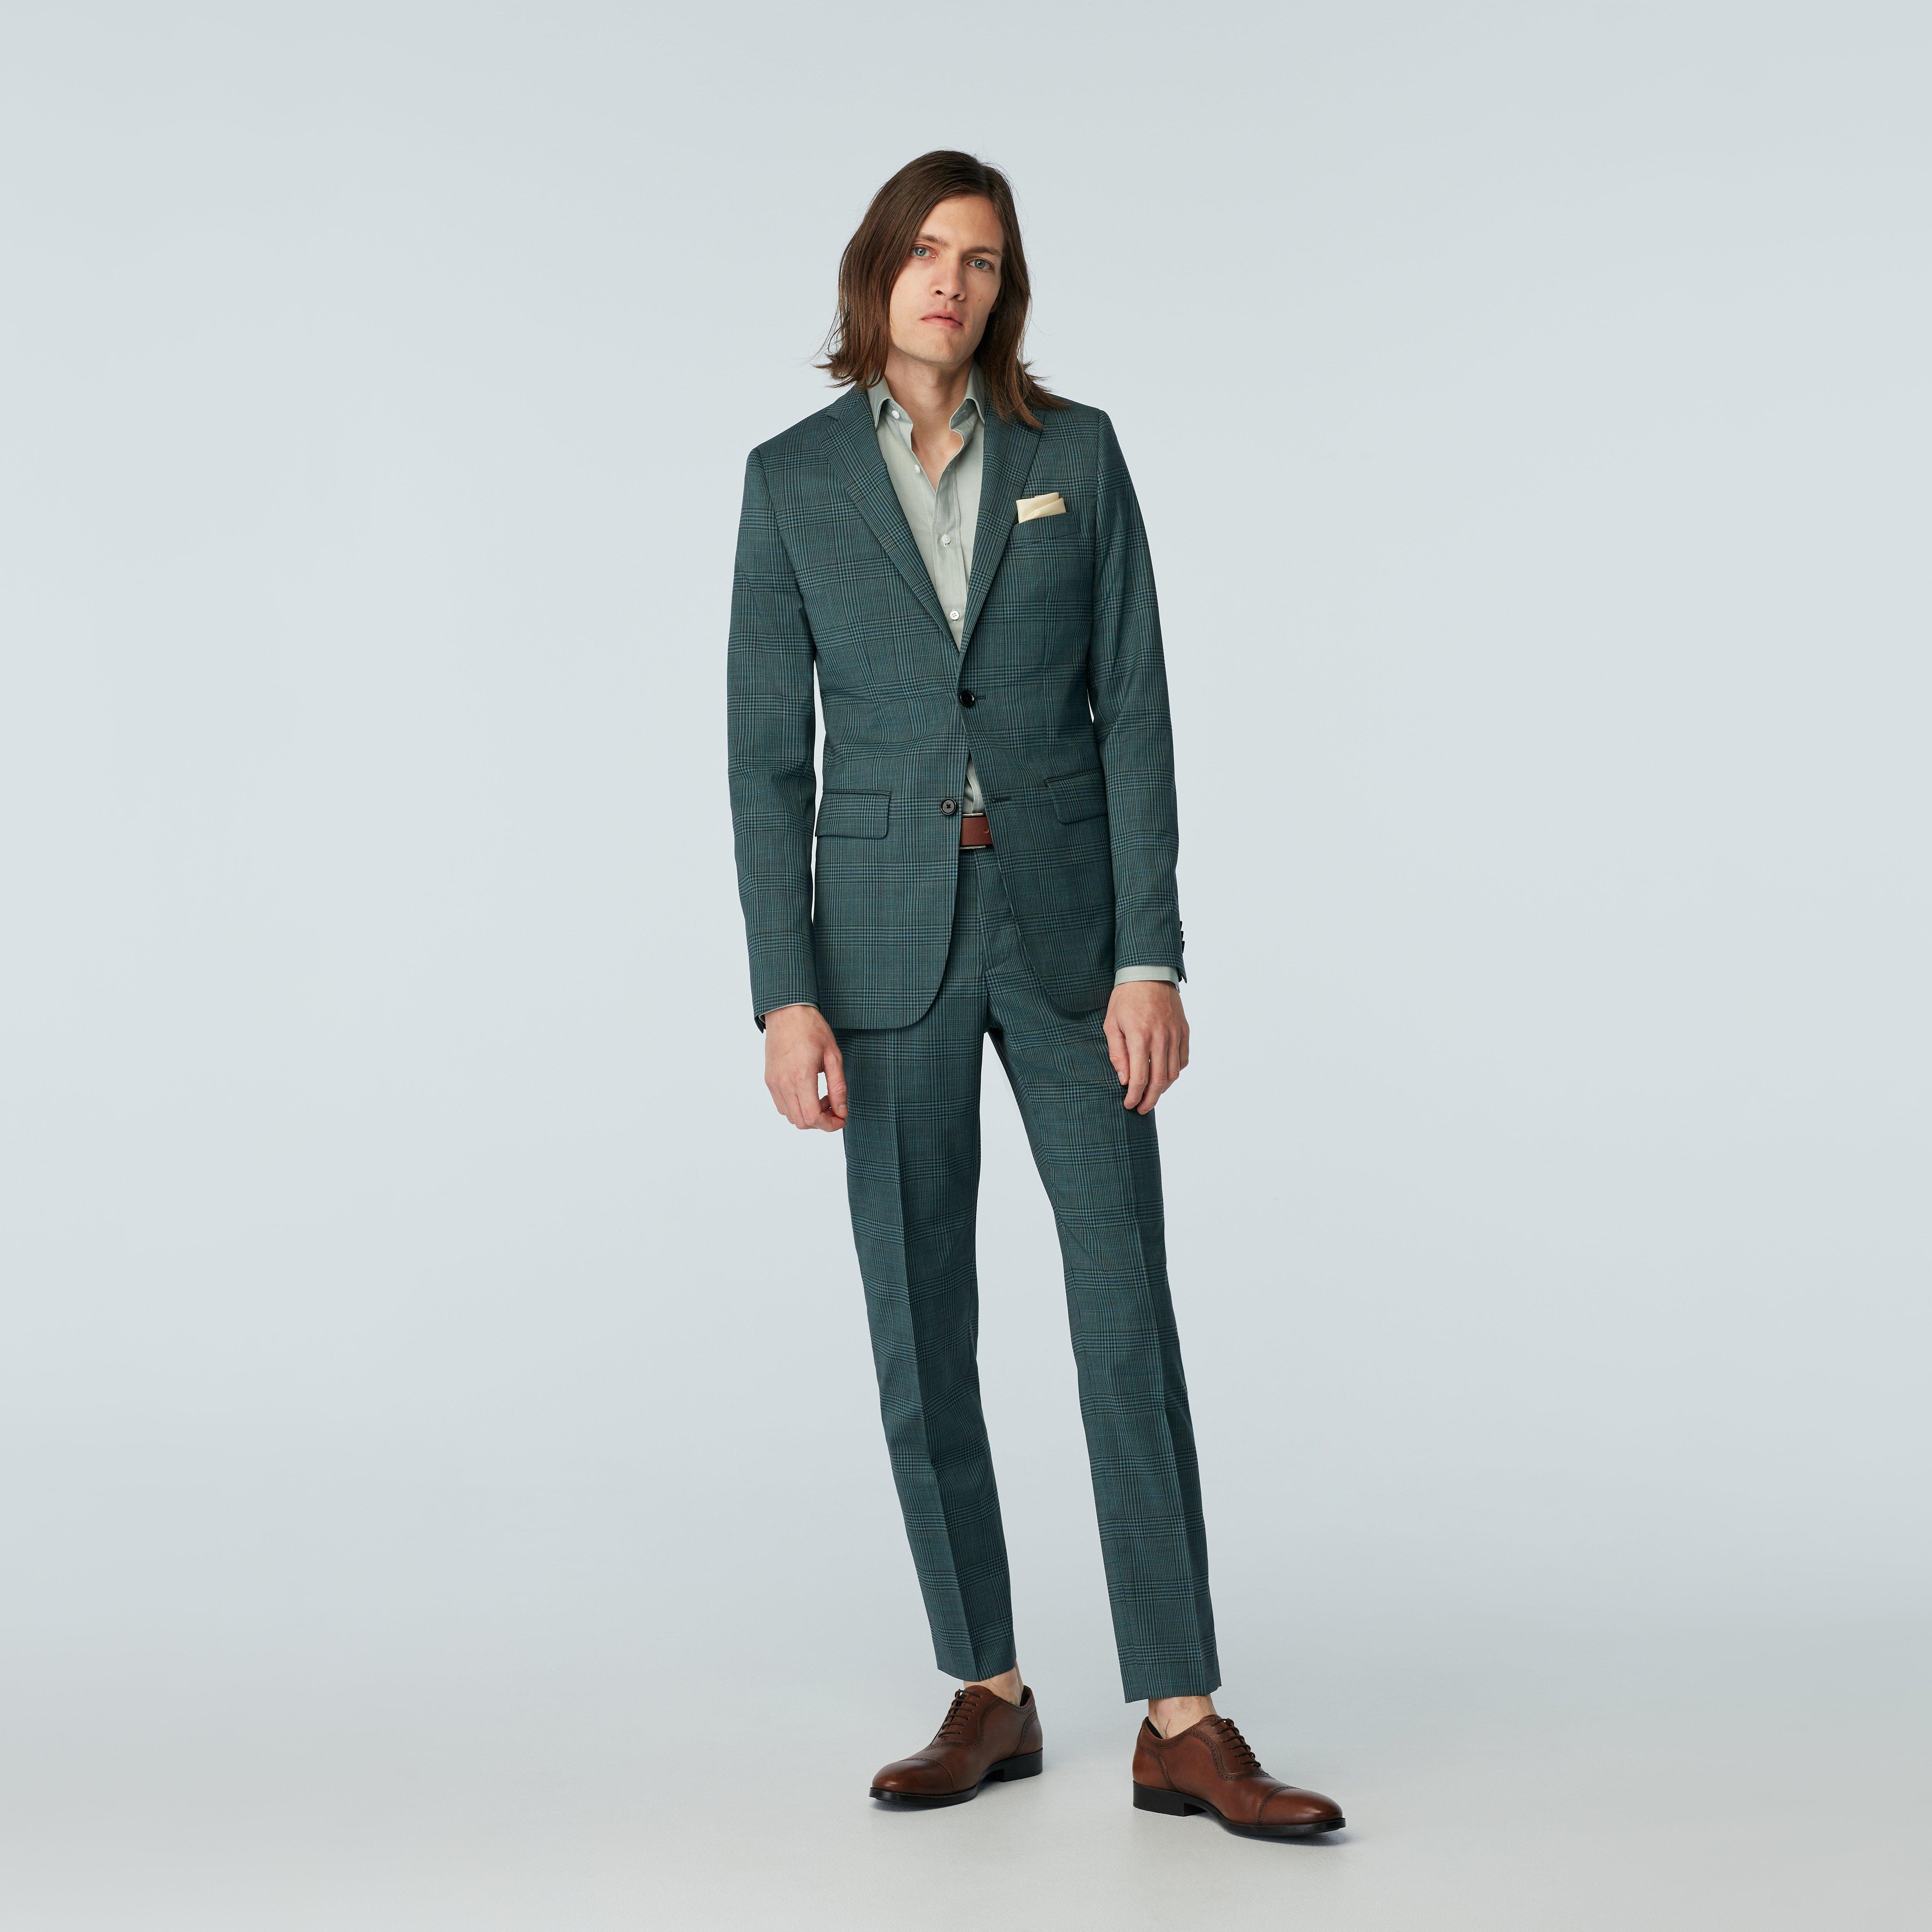 INDOCHINO DEBUTS THREE NEW LINES IN ORDER TO STREAMLINE BUSINESS